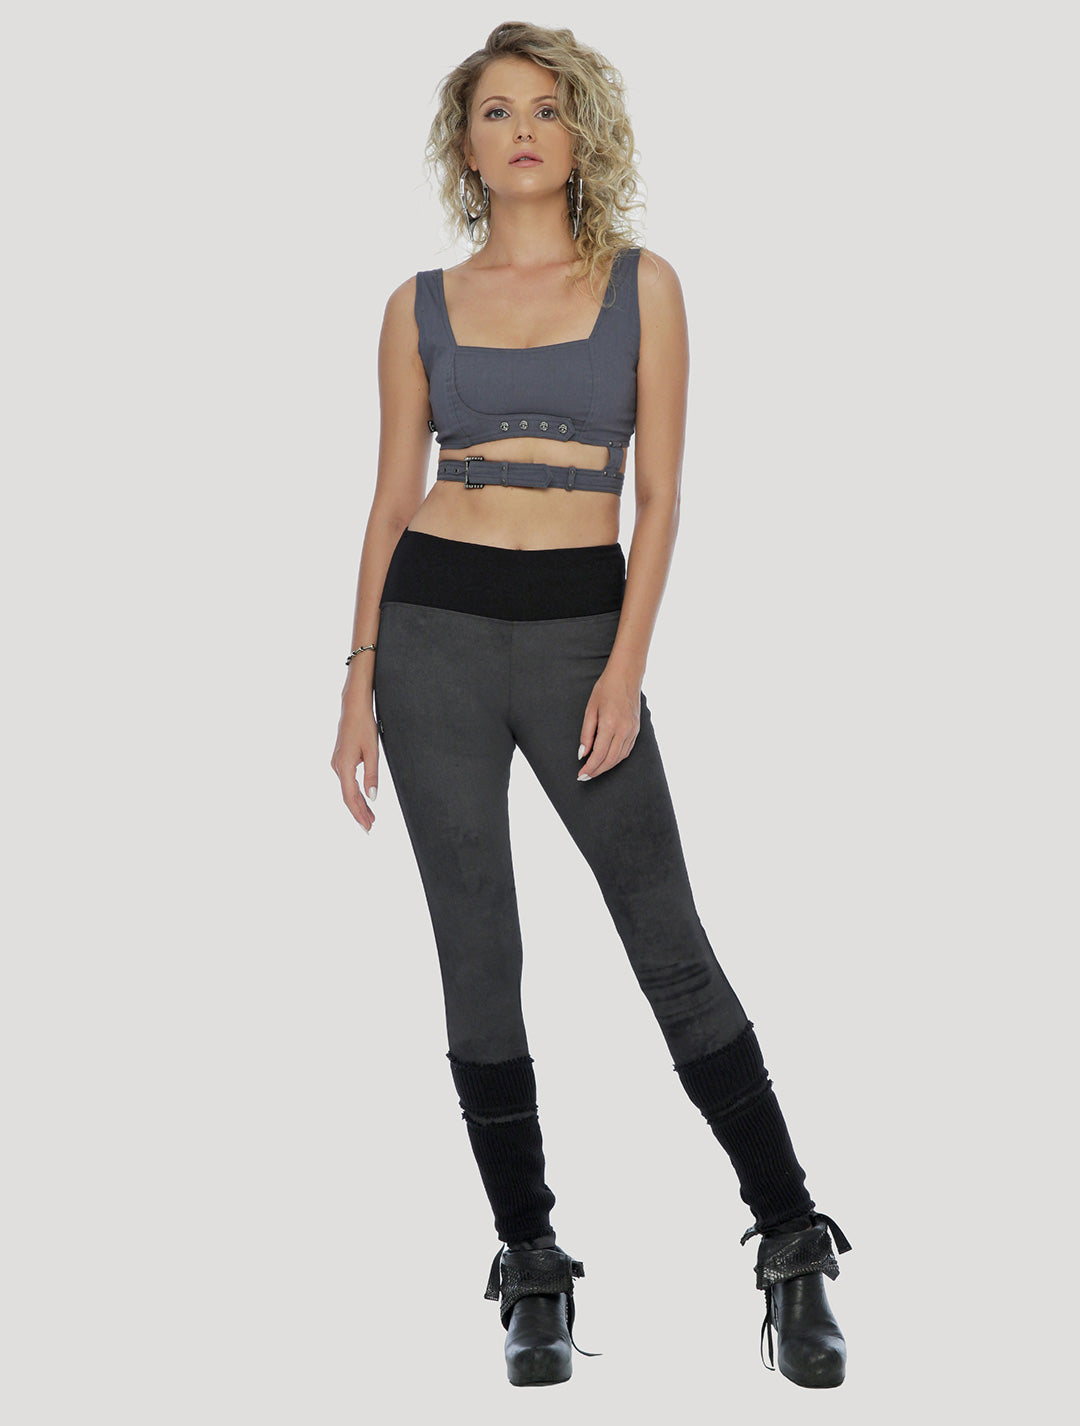 Solo Crop Top  Edgy Streetwear by Psylo Fashion